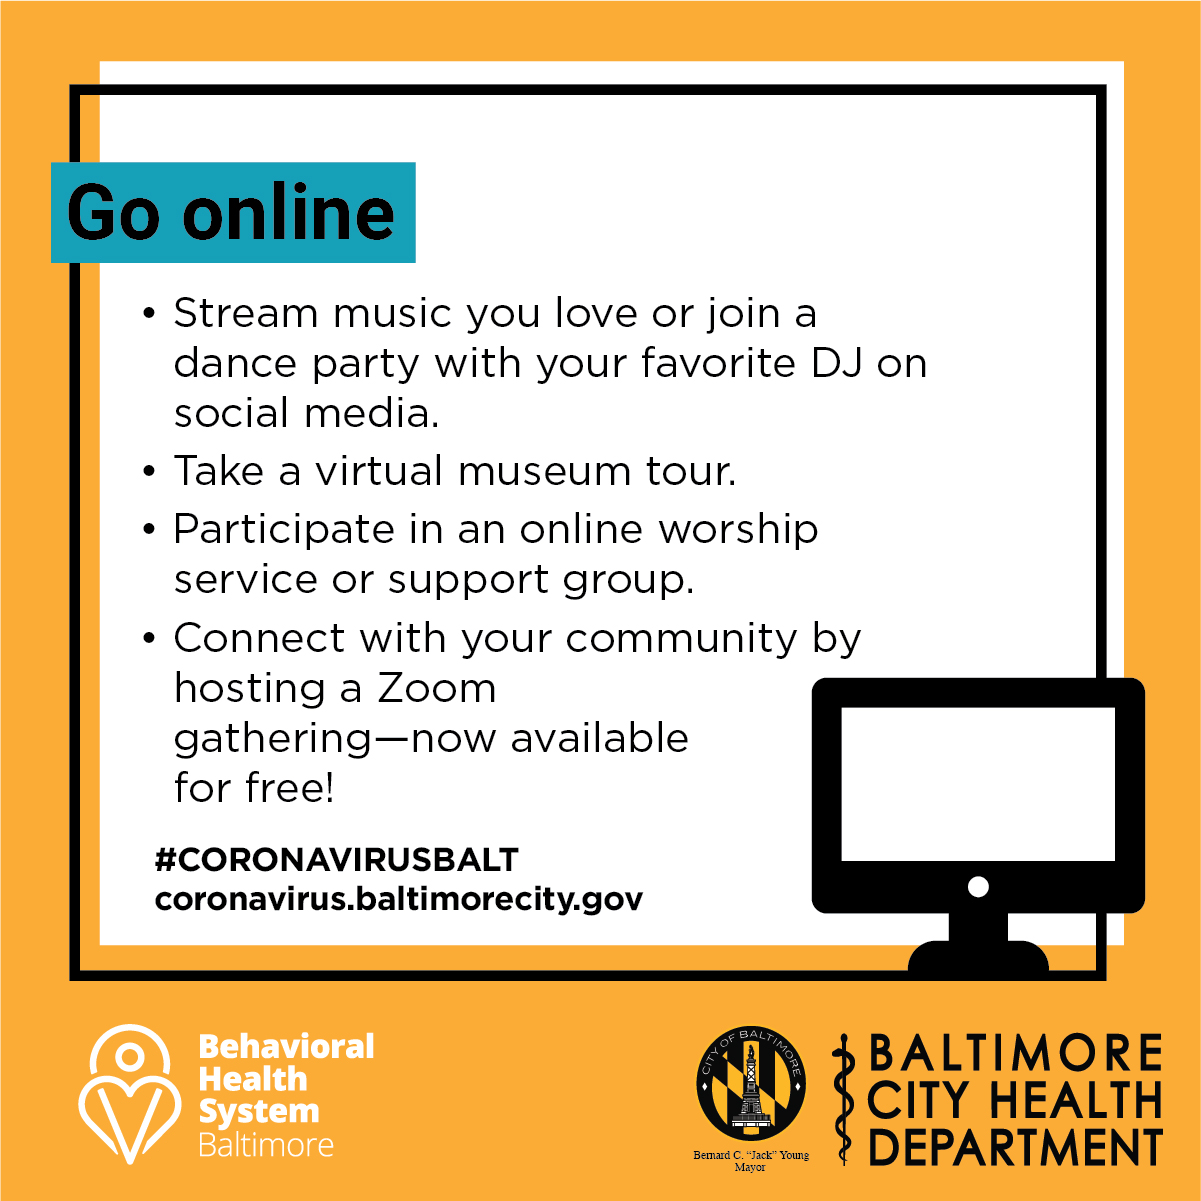 Go online to stream music, participate in support groups or connect with friends!